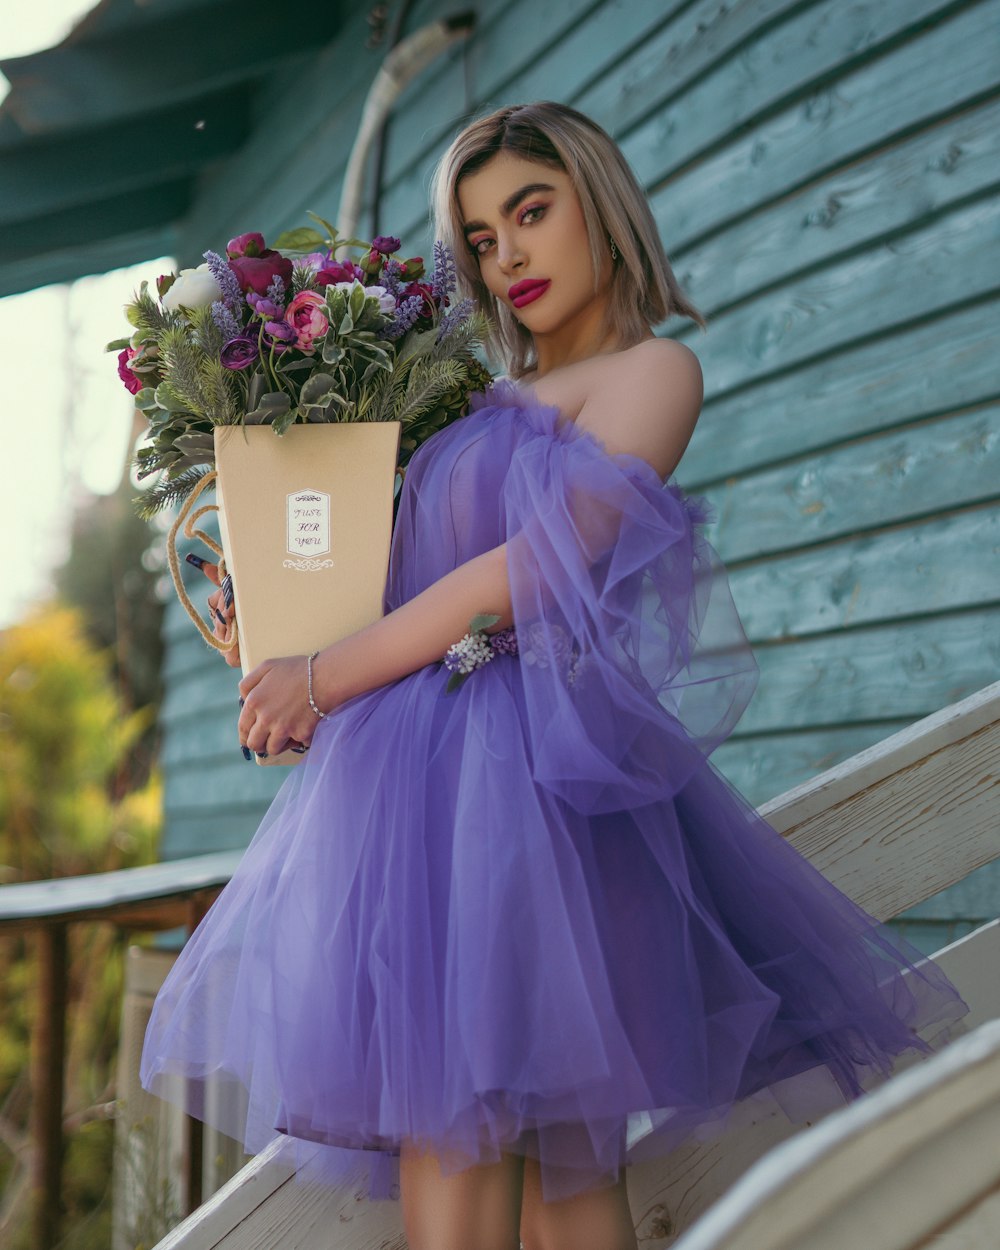 a woman in a purple dress holding a bouquet of flowers